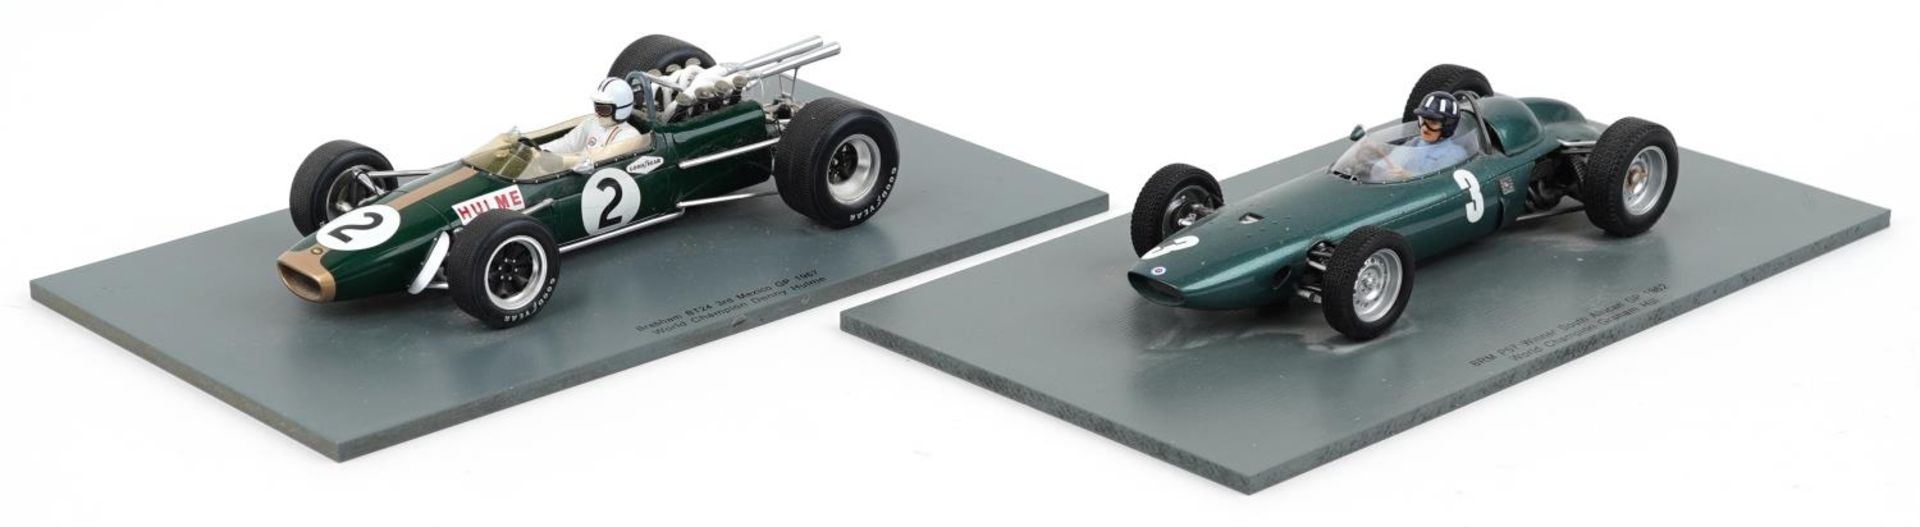 Two Spark 1:18 scale diecast model racing vehicles with boxes and display stands comprising BRM - Bild 2 aus 3